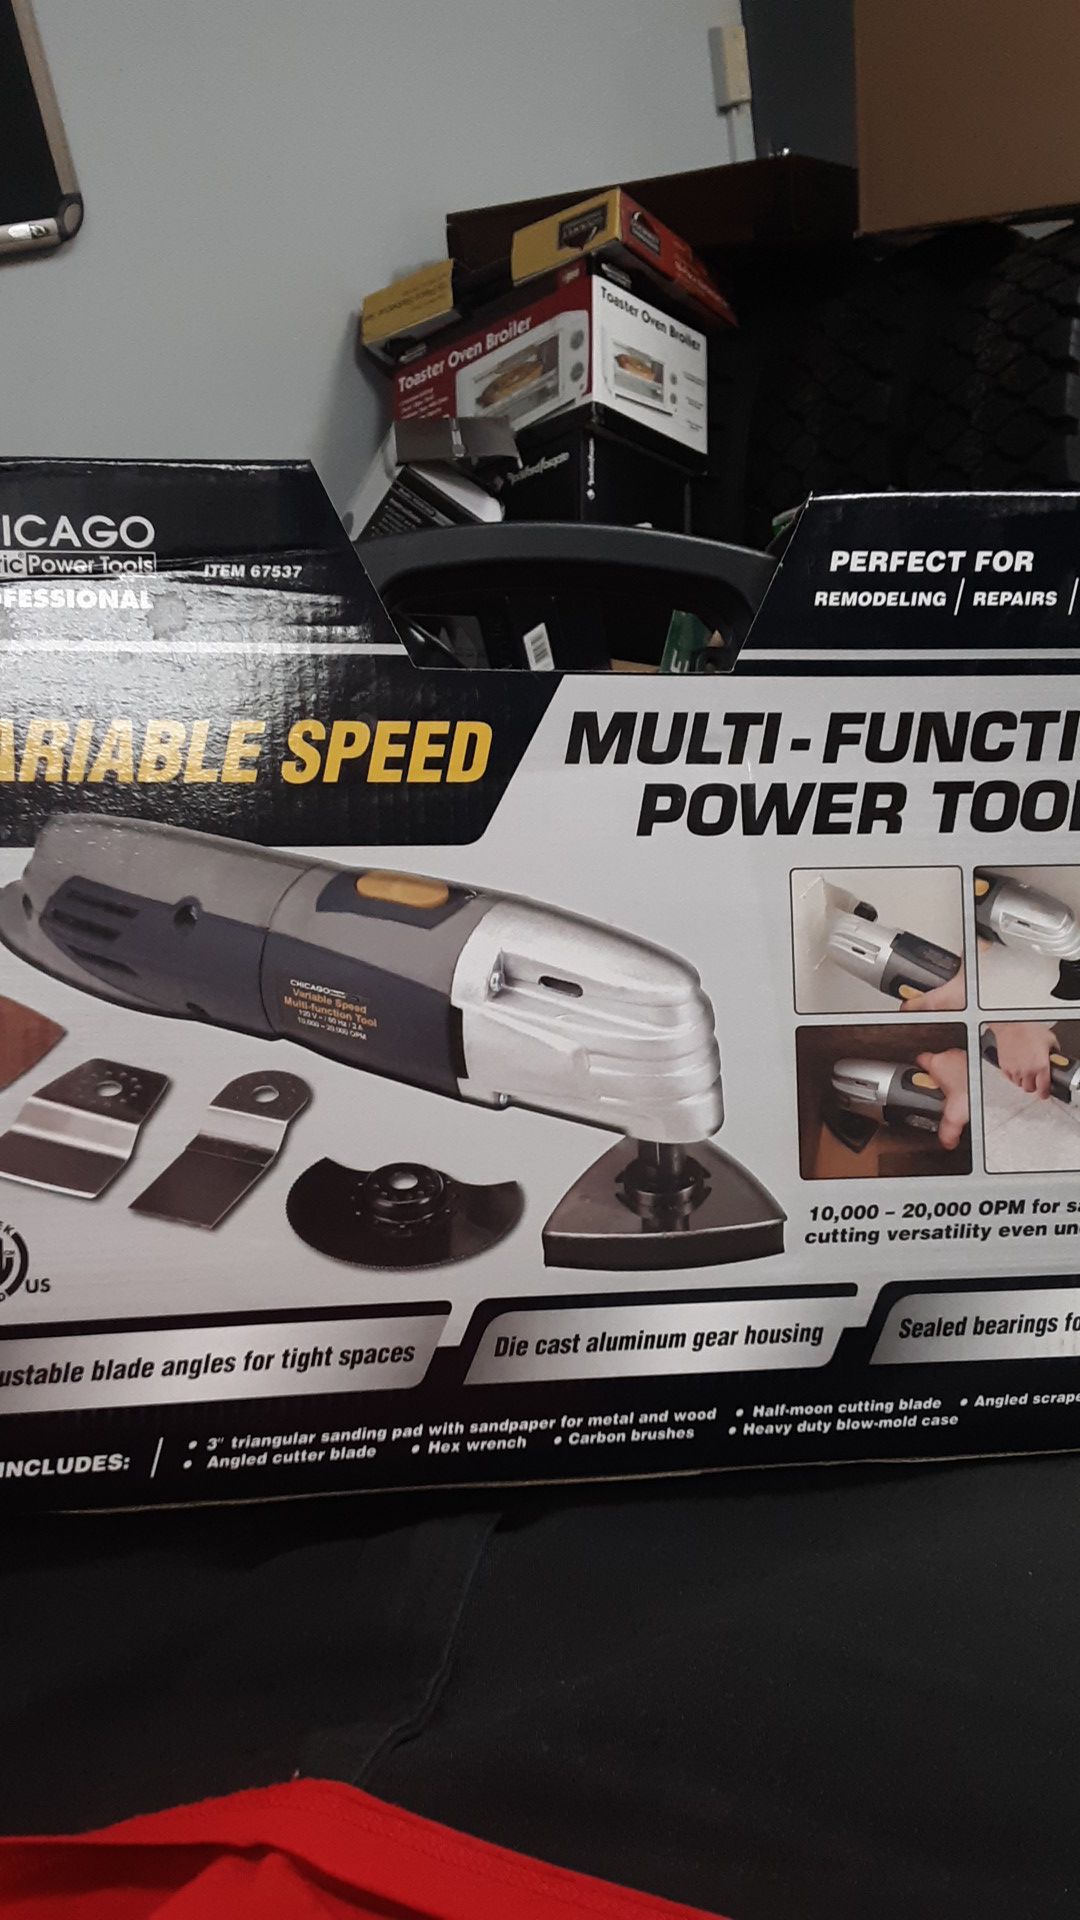 Chicago Electric Variable Speed Multifunction Power Tool item 67537